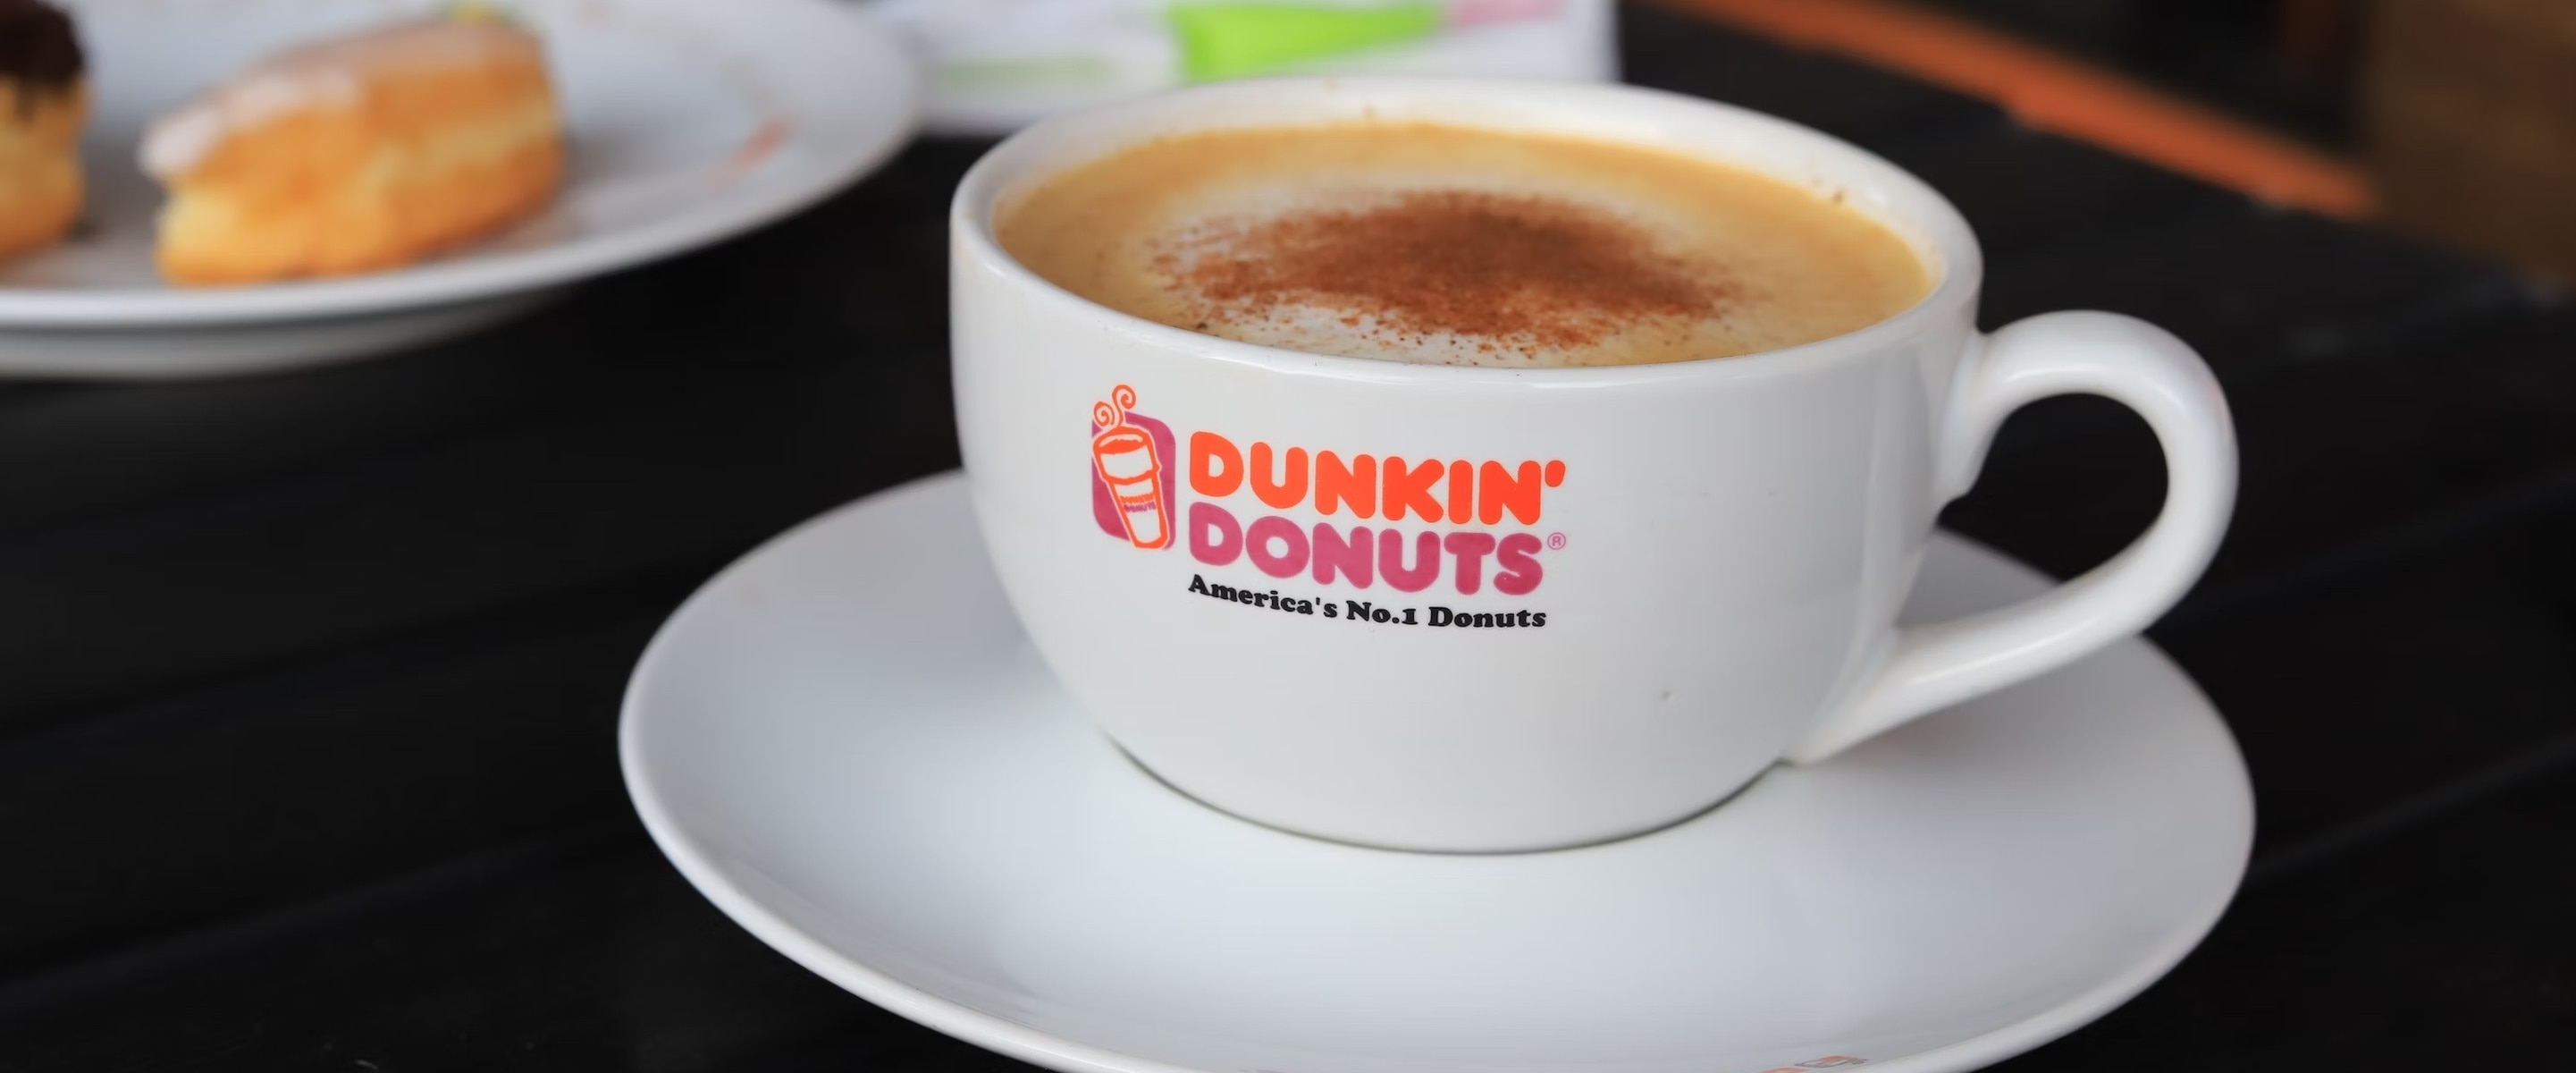 Could This Lawsuit Against Dunkin’ Finally End Vegan Milk Surcharges? Experts Weigh In&nbsp;